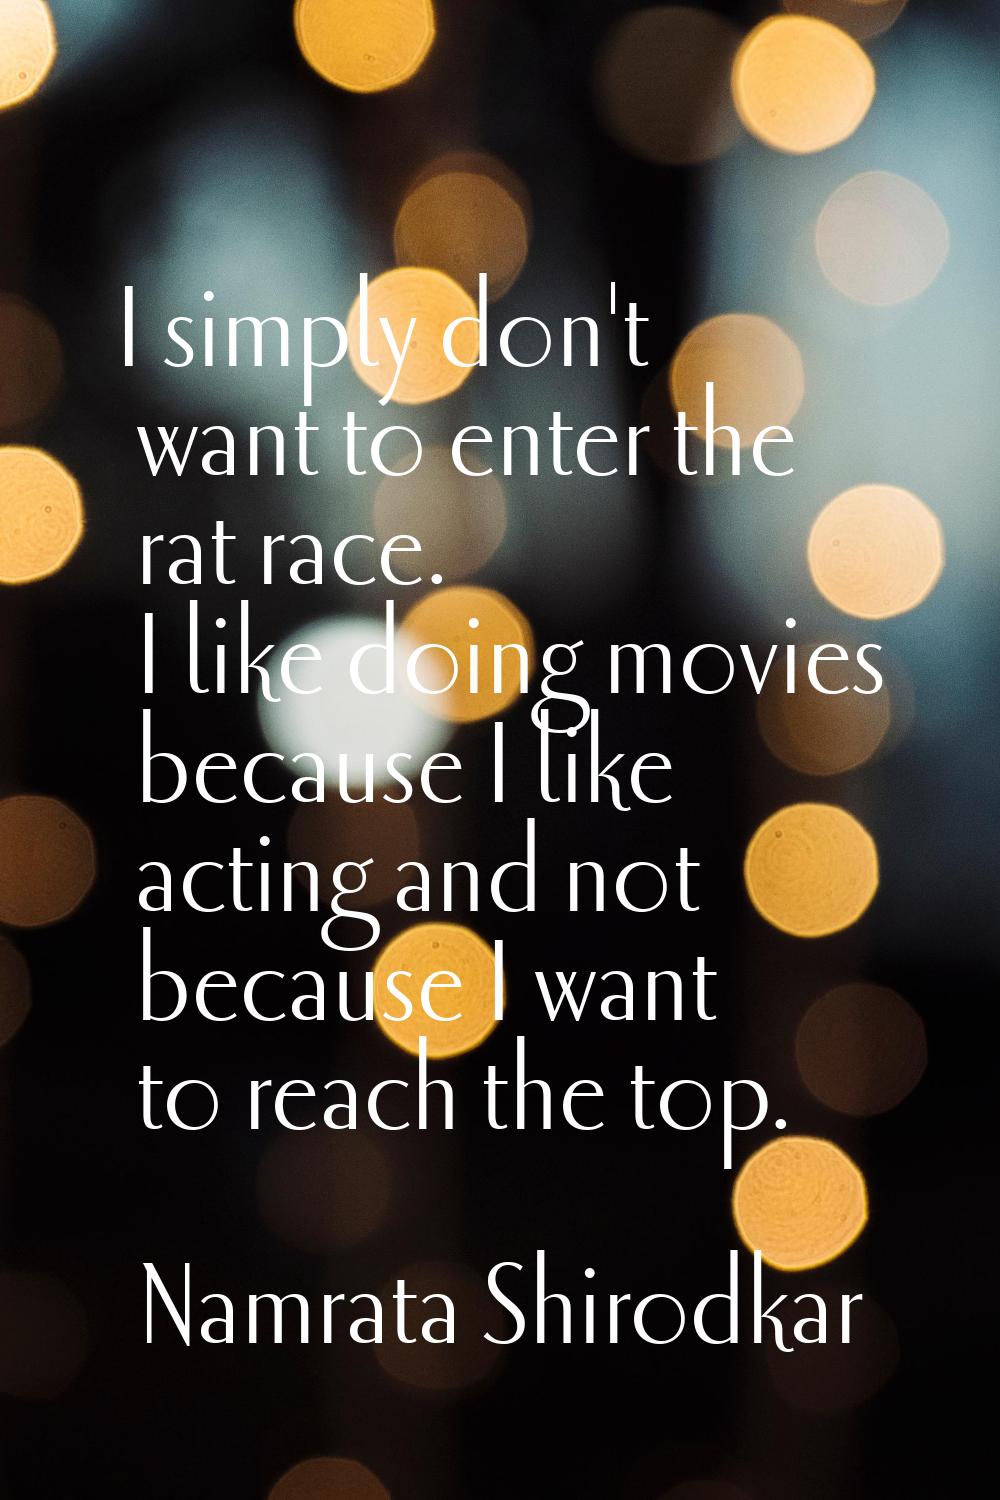 I simply don't want to enter the rat race. I like doing movies because I like acting and not becaus